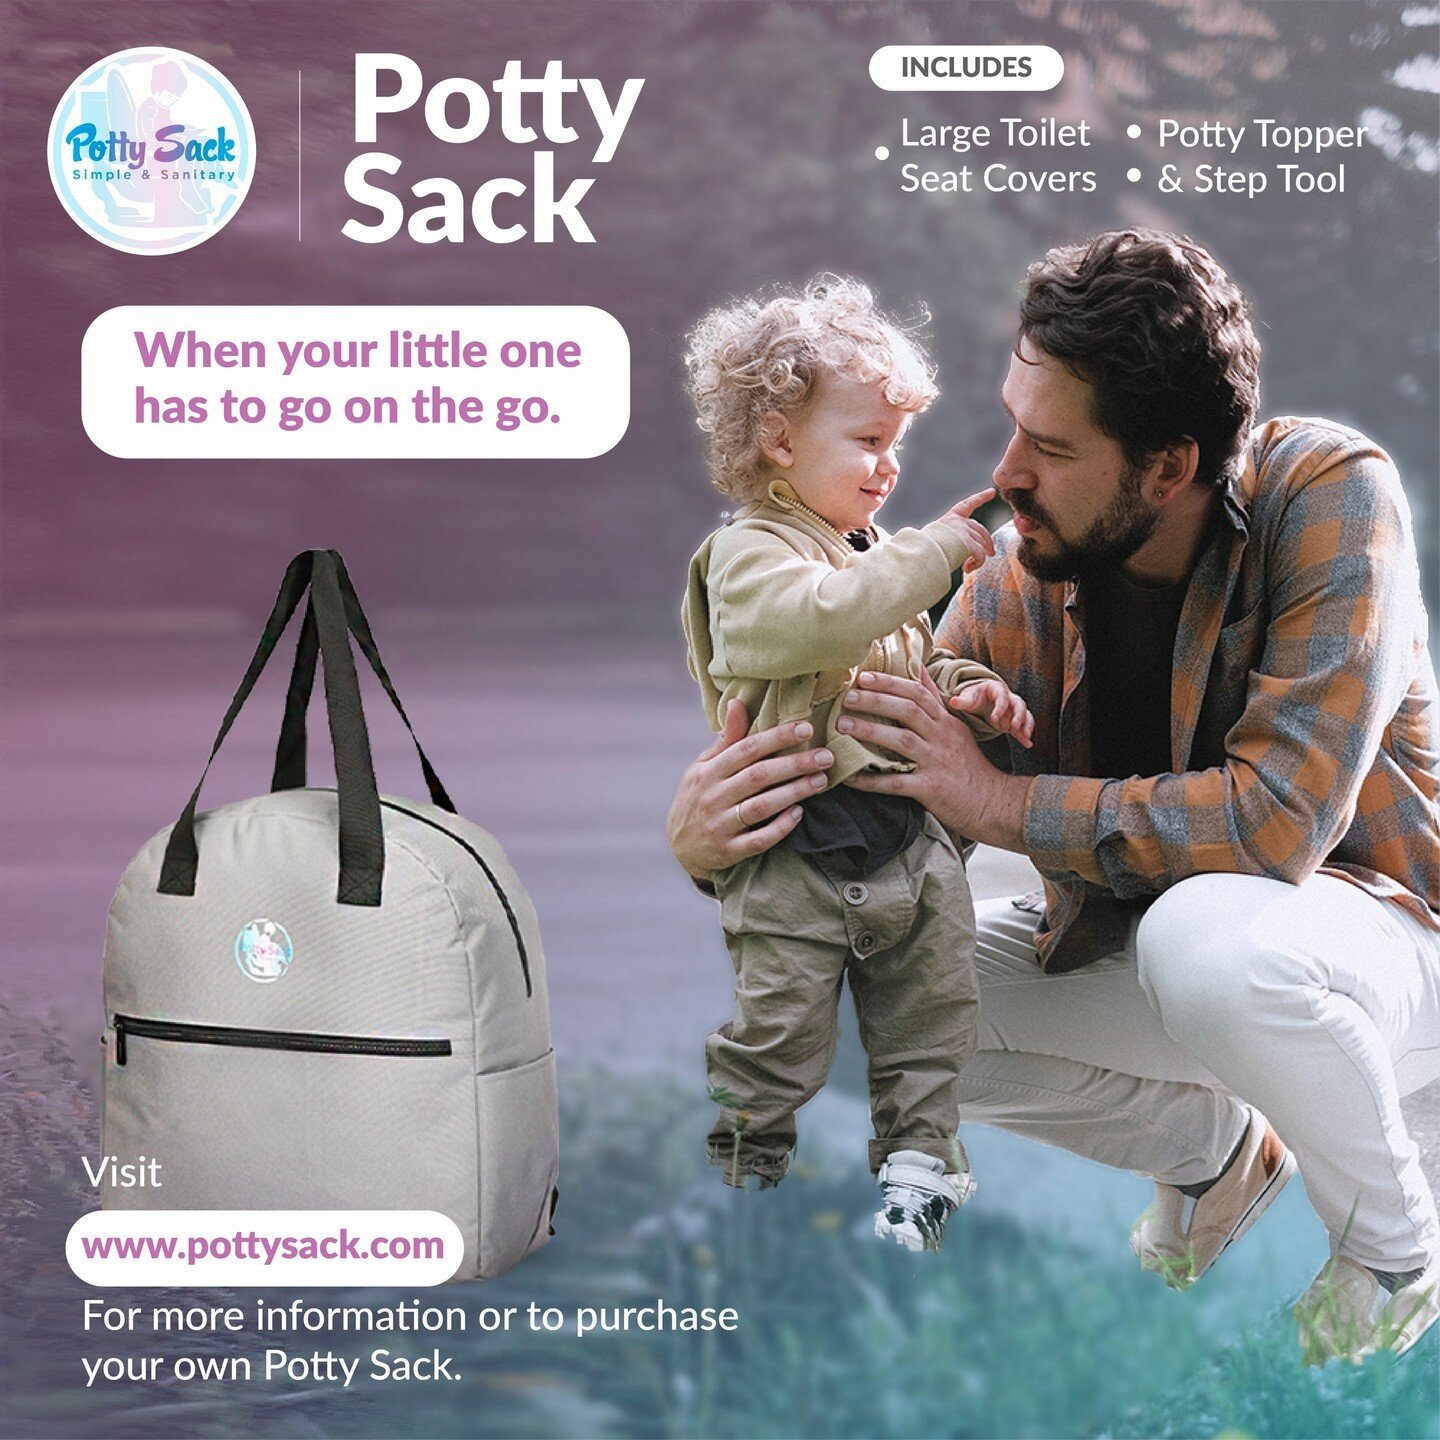 Potty Sacks are available for Order!

Check out Our Potty Sacks Website 
www.pottysacks.com